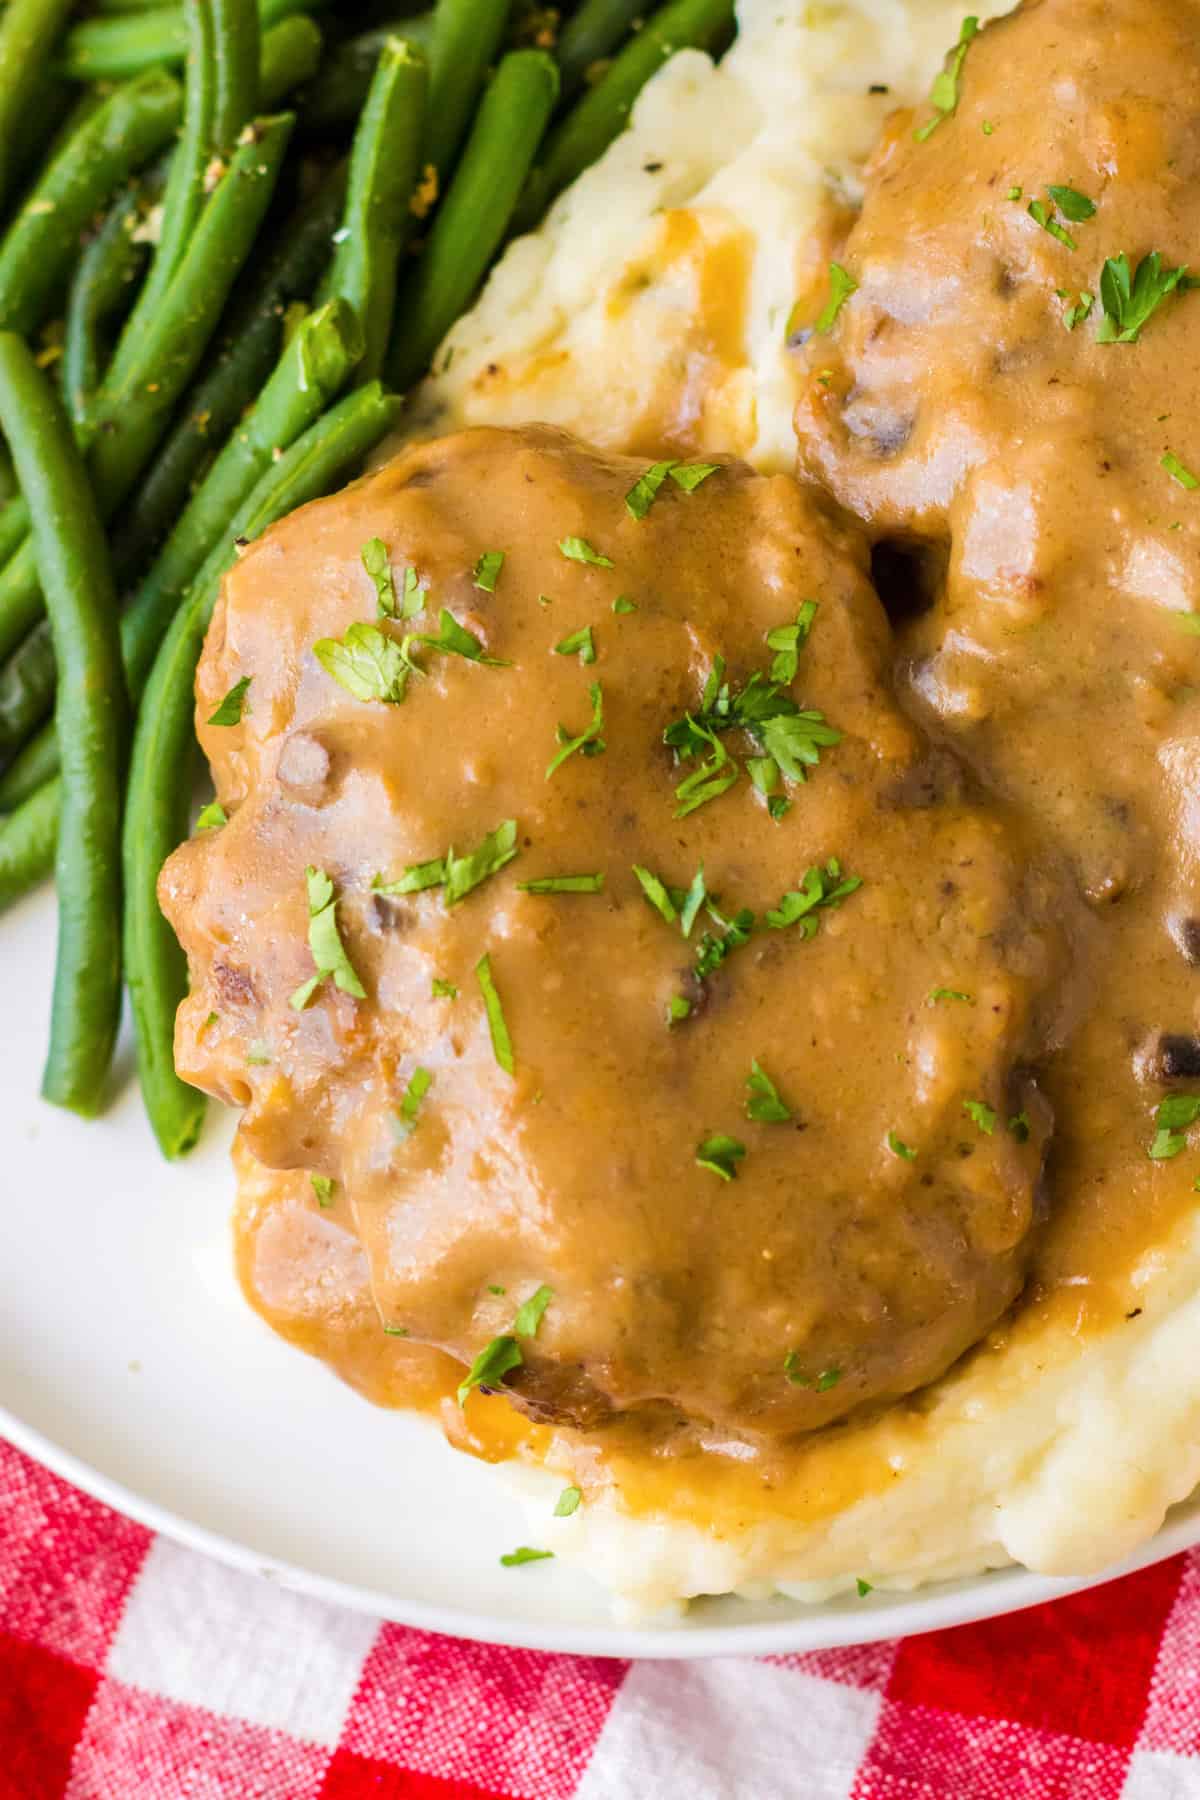 Crockpot salisbury steak with gravy served on a bed of mashed potatoes and garnished with chopped fresh parsley.